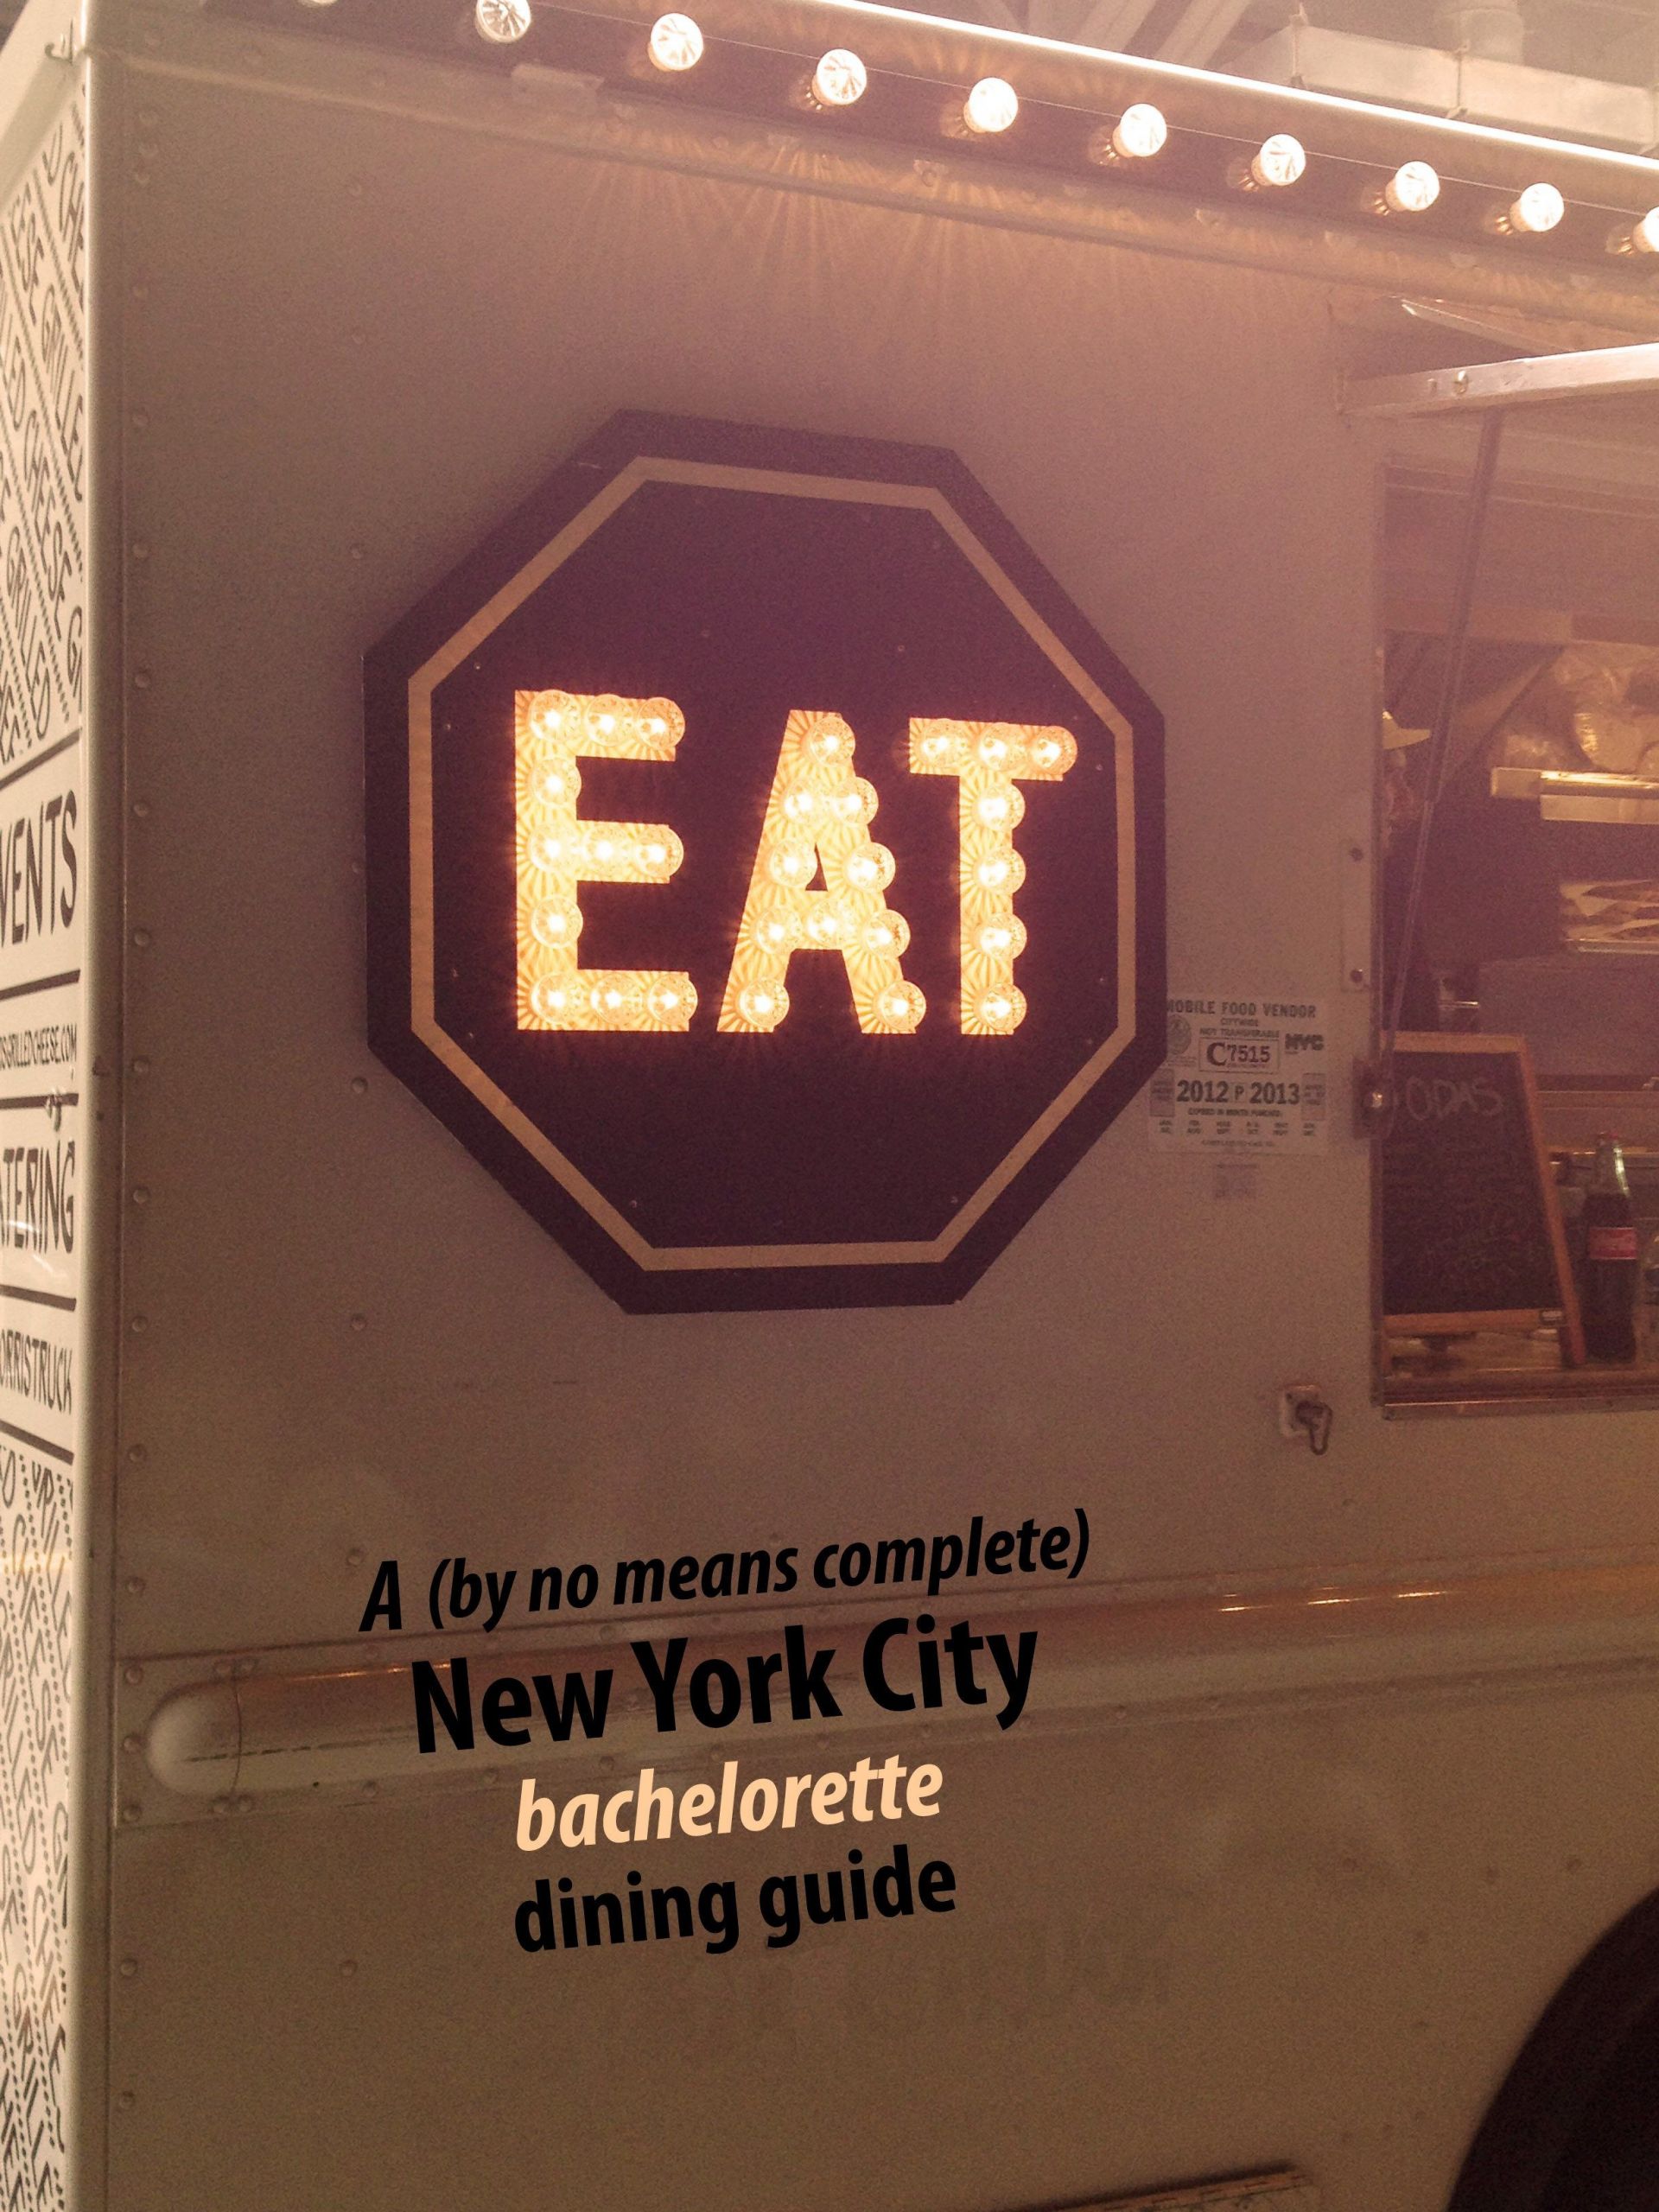 Bachelorette Party Dinner Ideas Nyc
 A New York City Bachelorette Dining Guide